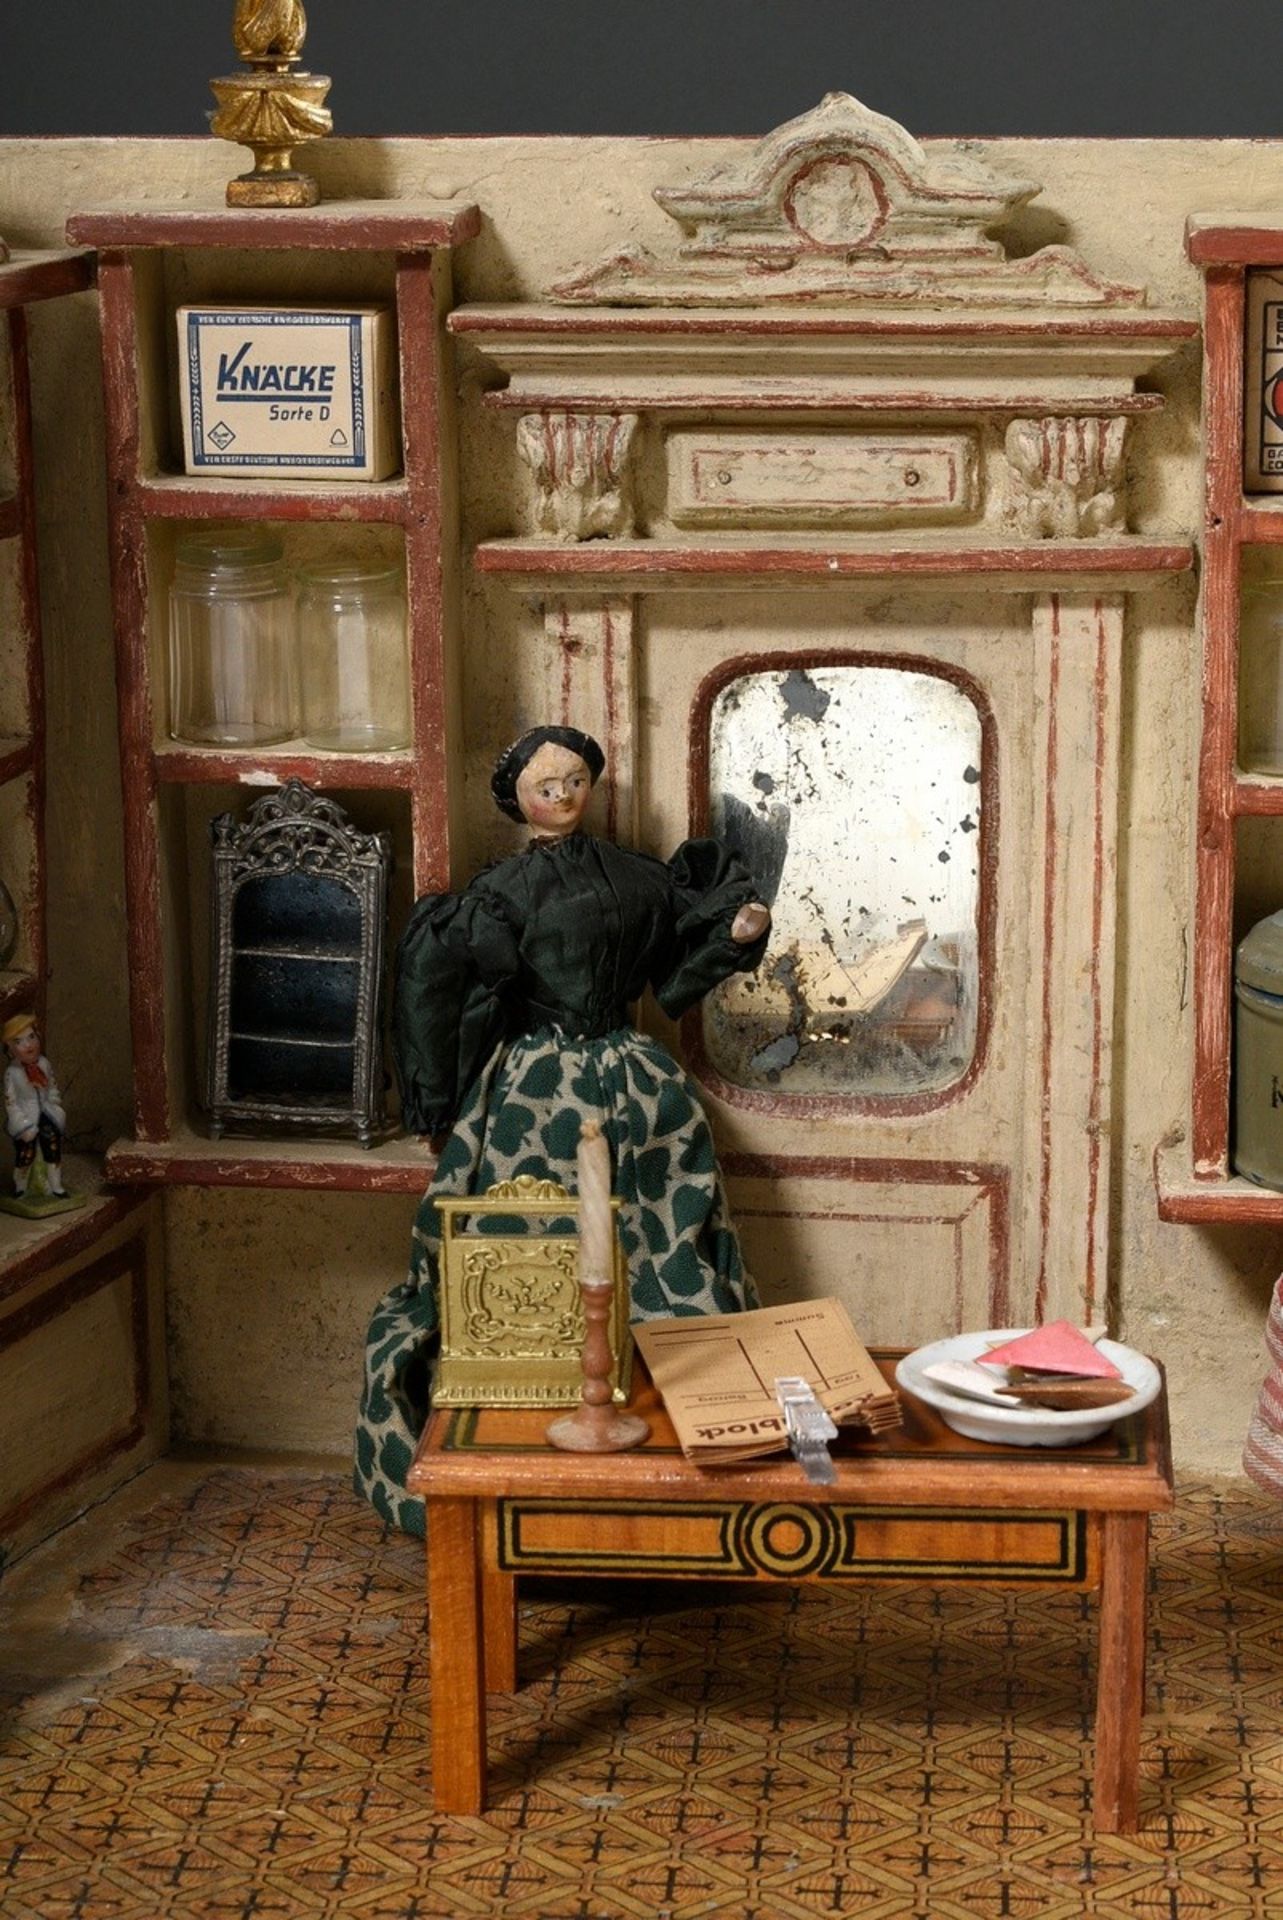 Dolls' shop with dolls and rich interior: e.g. pewter plates, glass bottles, porcelain jugs, around - Image 2 of 14